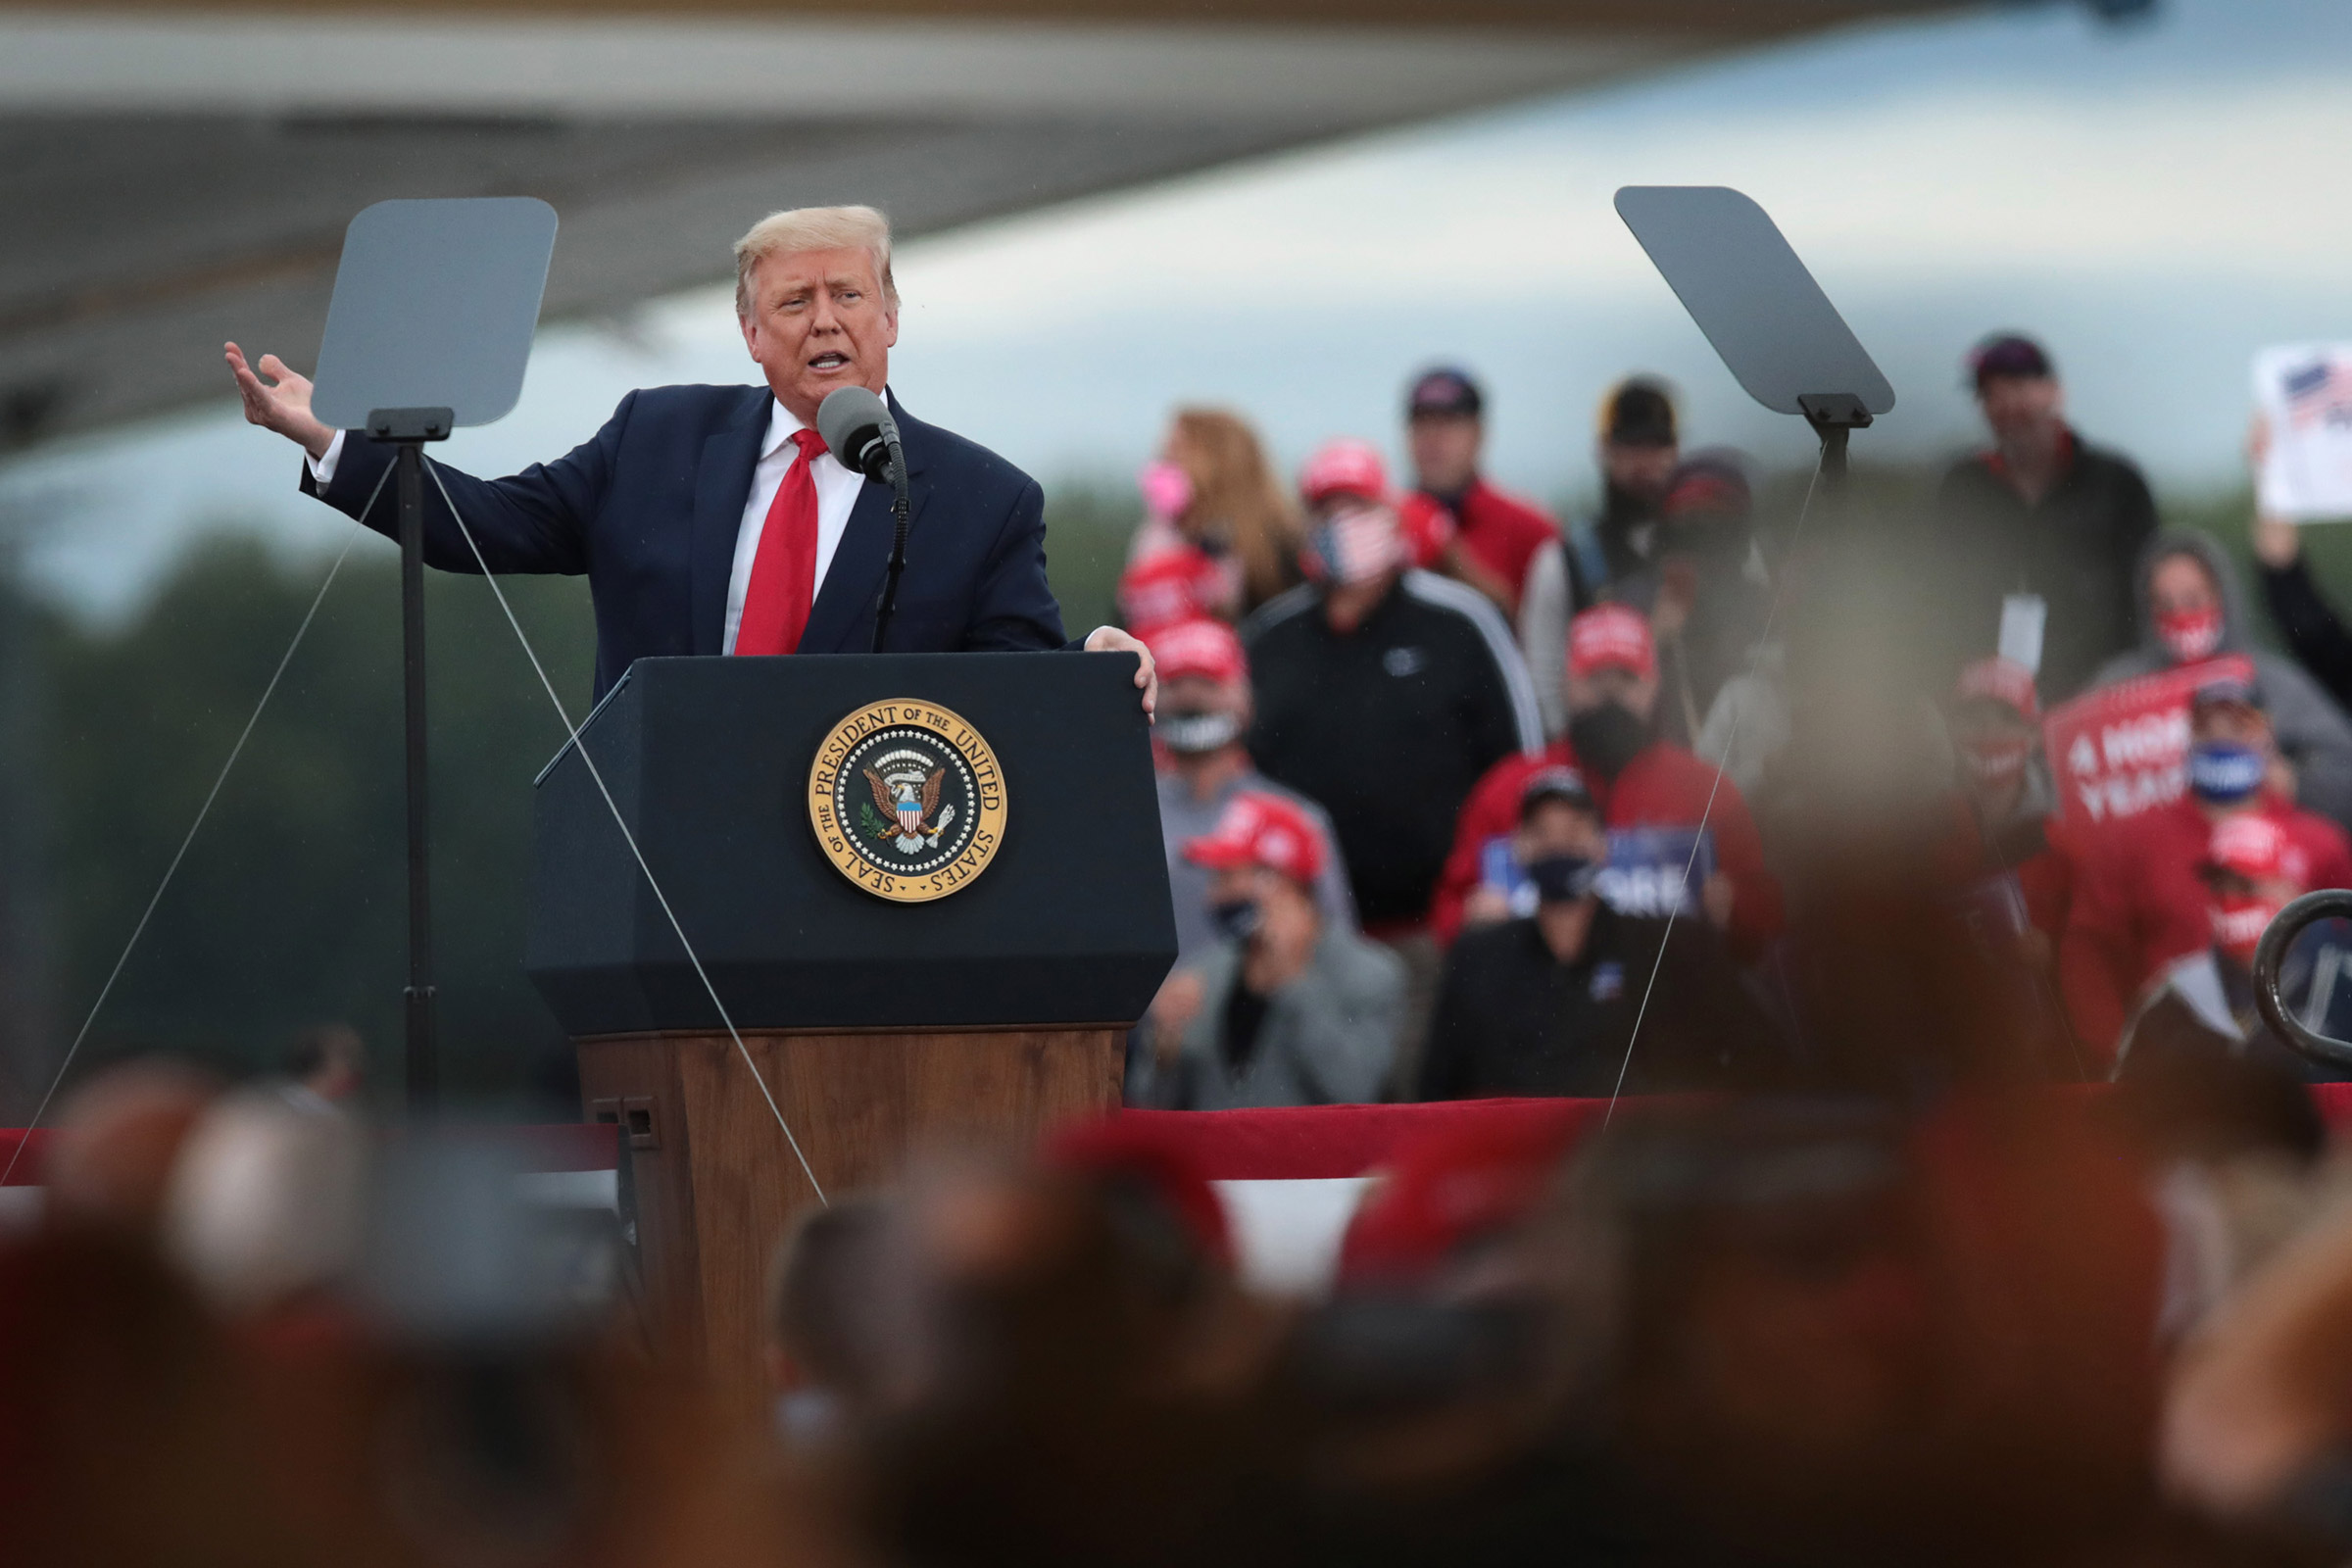 President Donald Trump speaks to supporters during a rally in Freeland, Mich., on Sept. 10, 2020. (Scott Olson—Getty Images)